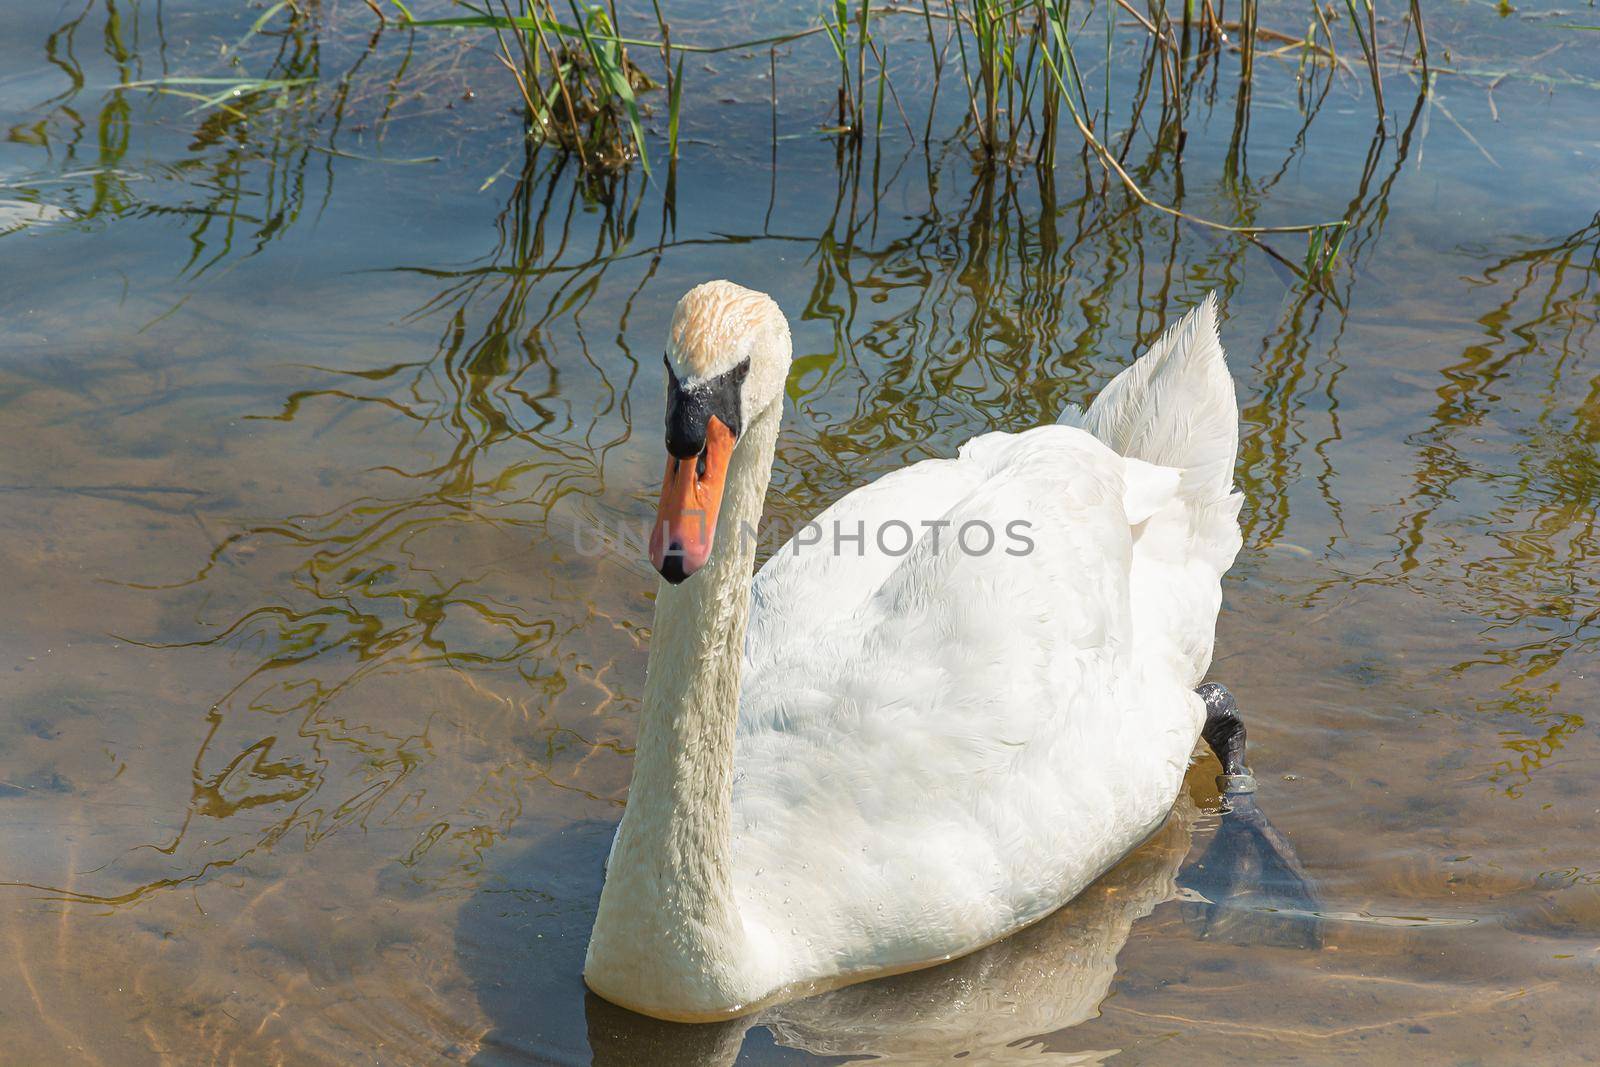 Wildlife. A close-up of a swan in the shallow water of a reservoir. Stock photo.